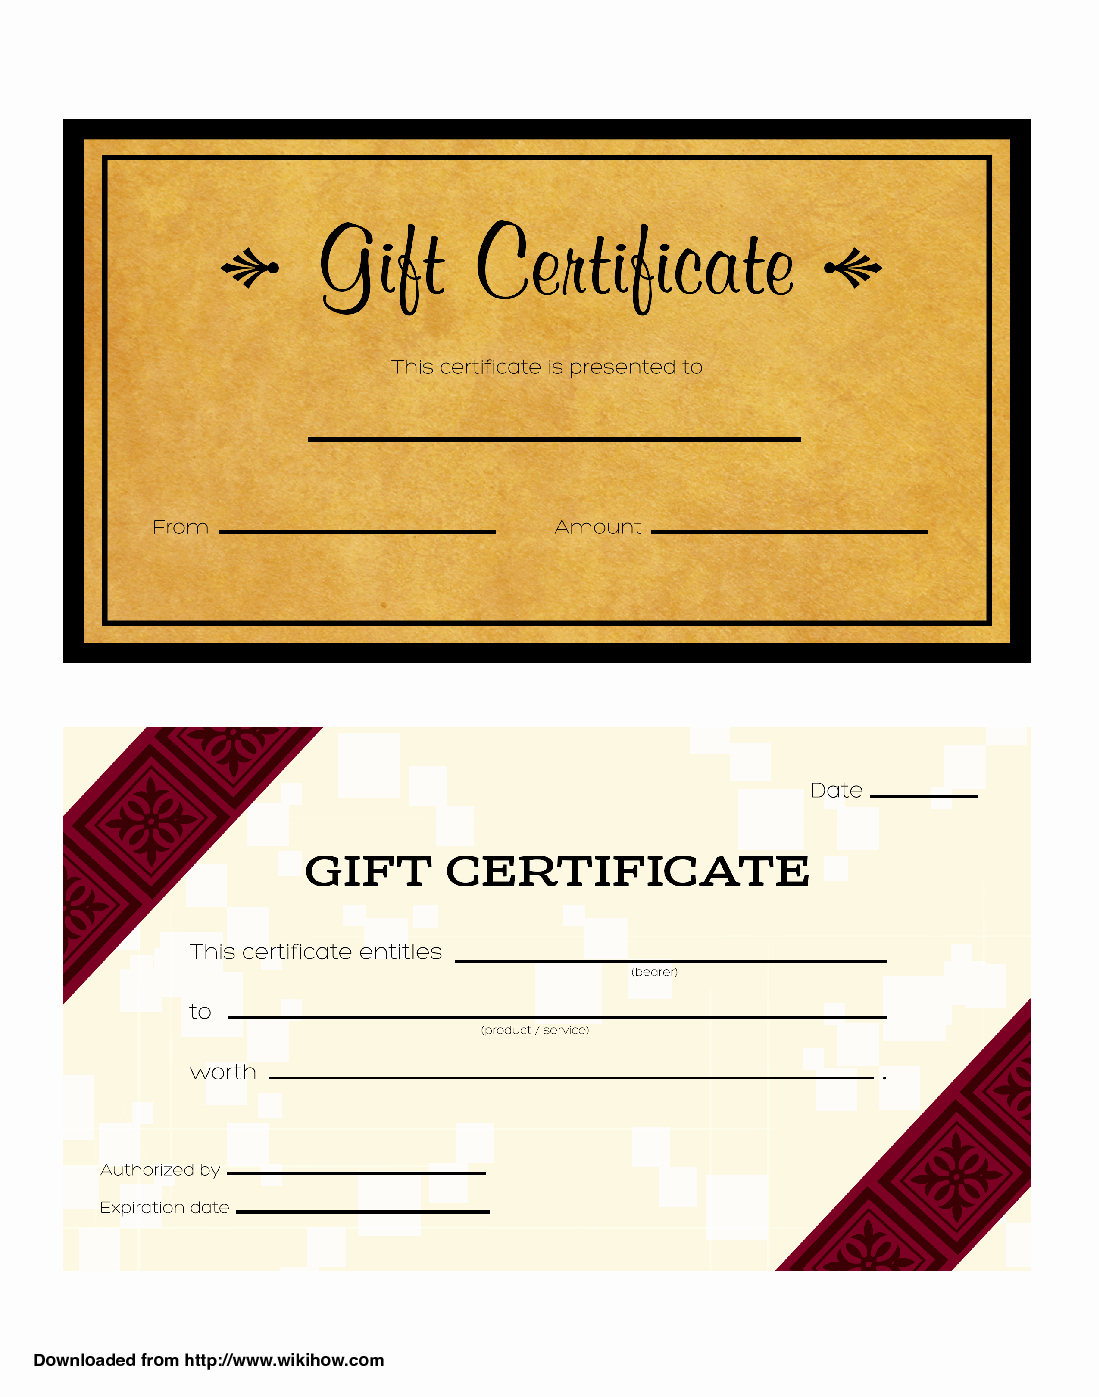 Make Up Gift Certificate Template Fresh Blank Gift Certificate Template Mughals